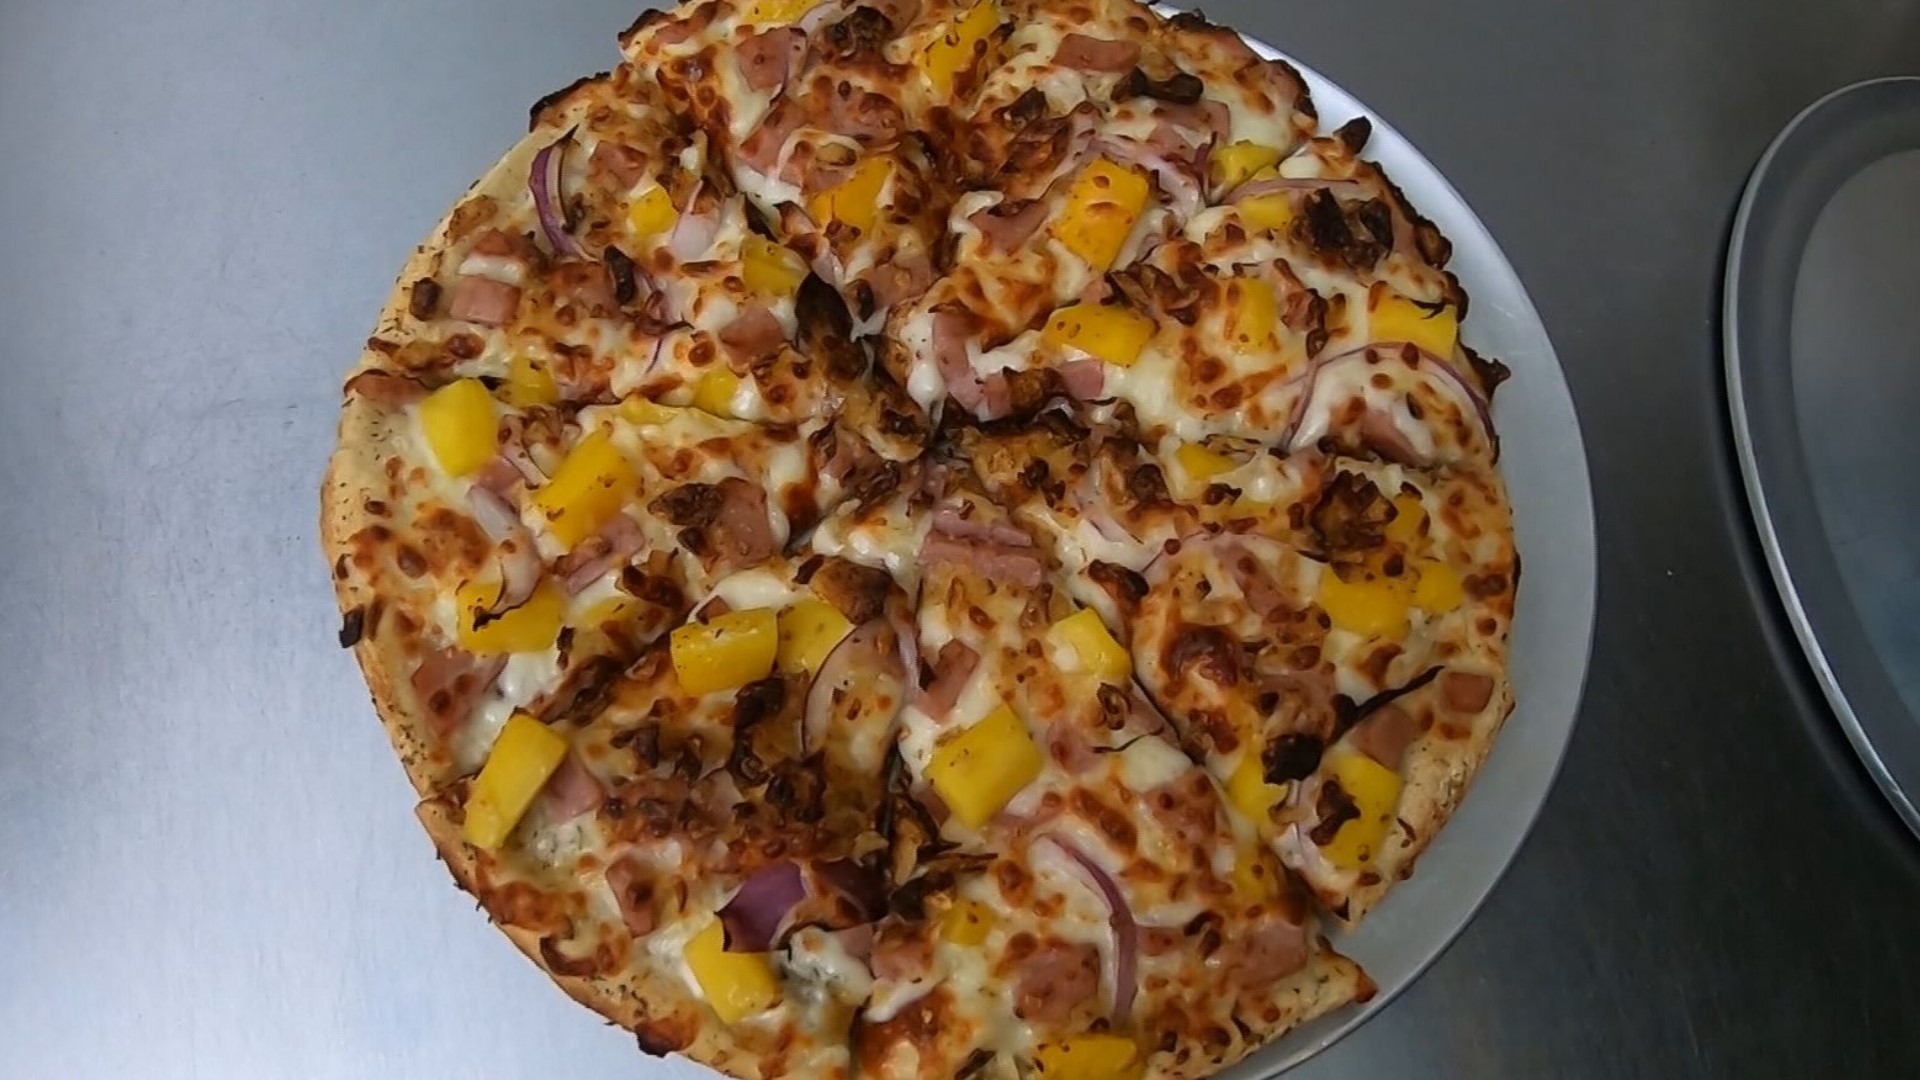 The Tiki Tap House specializes in island-inspired pizzas.